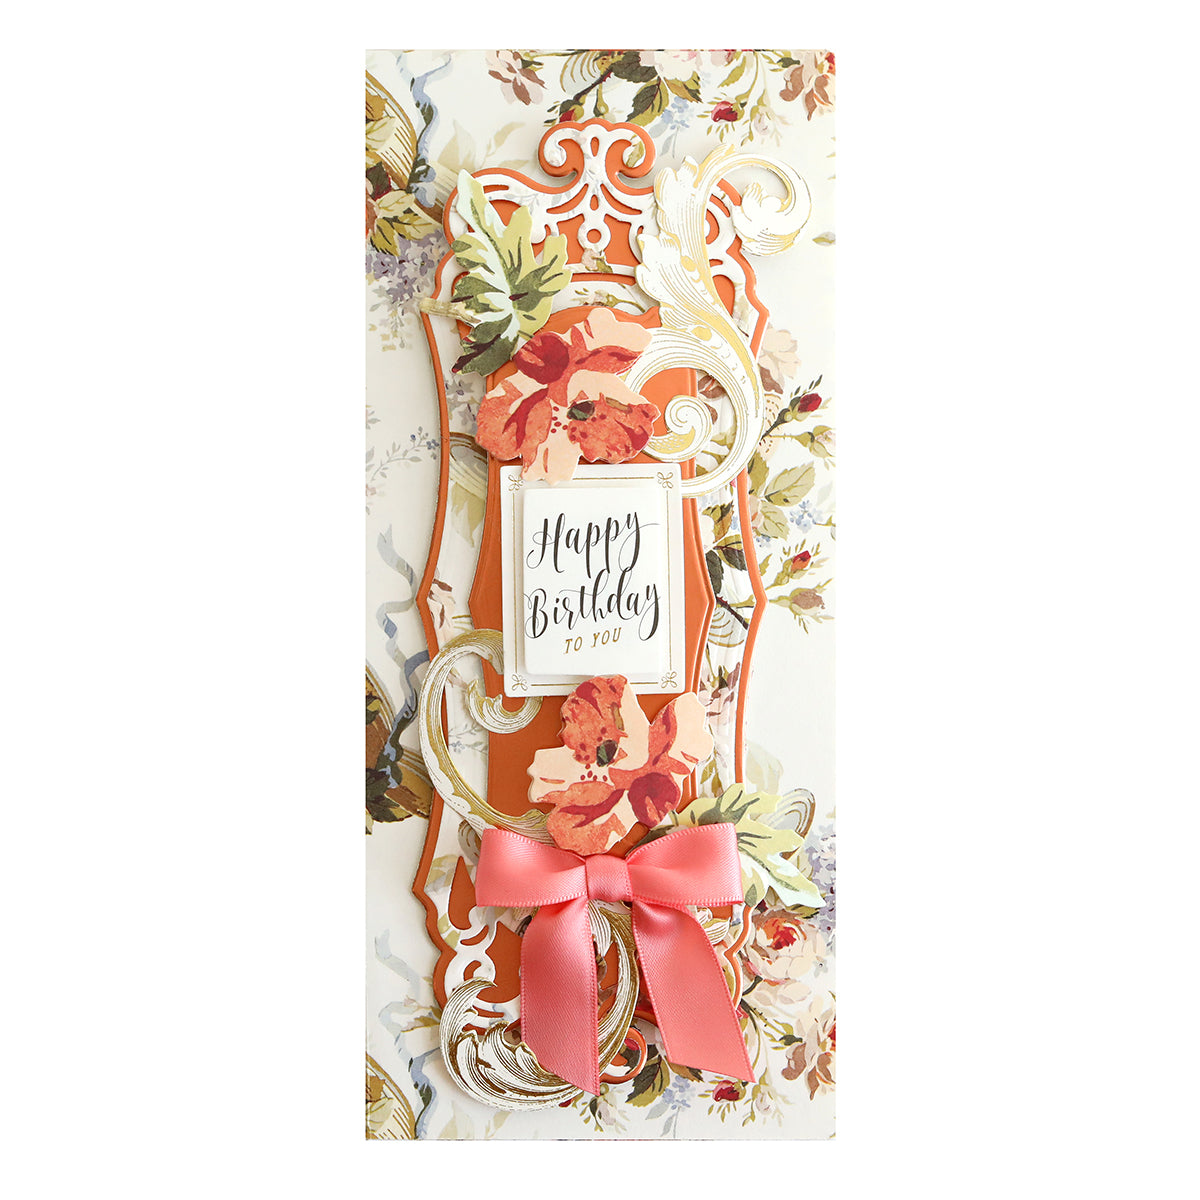 A Bright Matte Foil Cardstock birthday card with a shimmering bow and flowers.